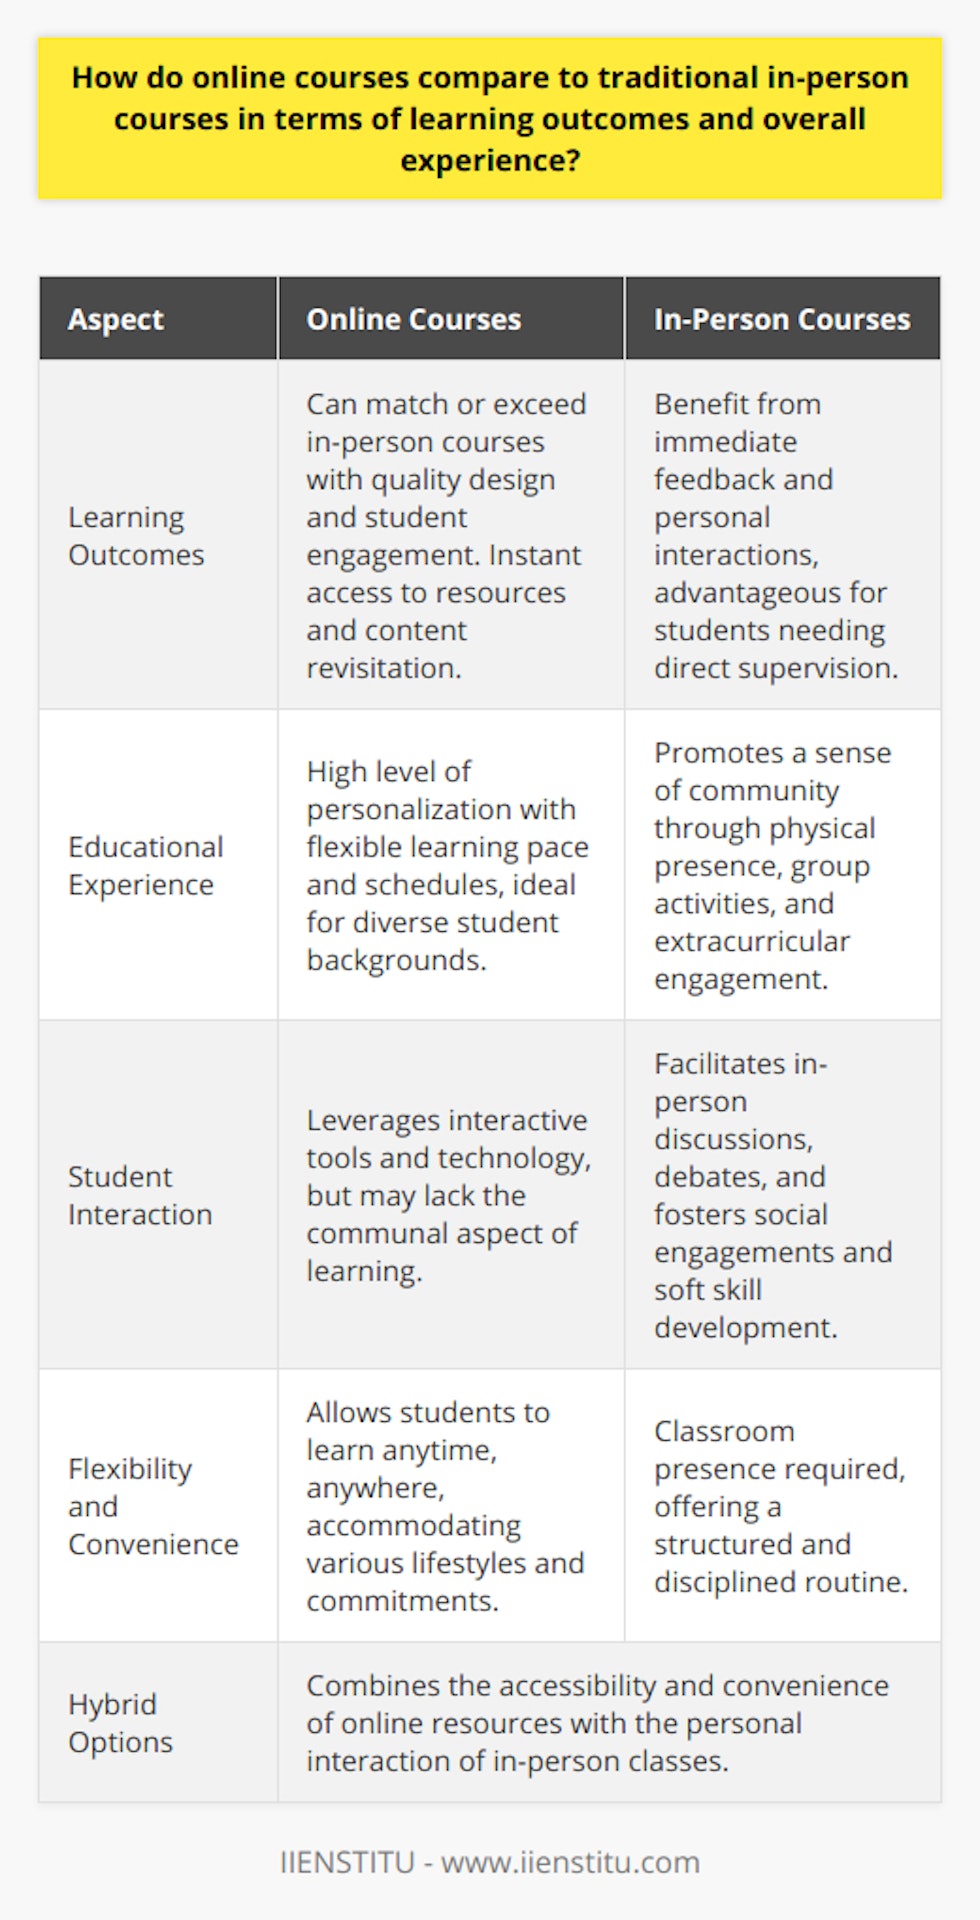 The educational landscape has been drastically redefined with the rise of online learning platforms, among which IIENSTITU stands out for its commitment to quality and accessibility. When comparing online courses to traditional in-person courses, there are several facets to consider regarding learning outcomes and overall experience.**Learning Outcomes – Online vs. In-Person**A key consideration in the debate between online and traditional courses is the impact on learning outcomes. Research indicates that learning outcomes in online courses can be equivalent to, if not surpass, those in traditional classroom settings, provided the courses are well-designed and the students are engaged. This suggests that the medium through which content is delivered, whether digital or physical, may be less important than the instructional design and delivery.Online platforms like IIENSTITU leverage cutting-edge technology and pedagogical methods, enabling students to access comprehensive course materials and engage with interactive tools that can augment the learning process. The effectiveness of online learning is often bolstered by instant access to vast resources and the ability to revisit lectures and materials as needed.Conversely, in-person education facilitates immediate feedback and personal interactions that can clarify complex ideas and stimulate intellectual debate. The structured environment of traditional classrooms can also benefit students who thrive under direct supervision and a more regimented learning schedule.**Overall Experience – Personalization vs. Community**The overall educational experience differs notably between online and in-person courses. Online education offers a level of personalization and convenience that is hard to match in traditional settings. Students can learn at their own pace, often at times that fit around their commitments. This flexibility can be particularly beneficial for adult learners, part-time students, or those with mobility challenges.However, online learning may lack the sense of community and connection that comes from being physically present with peers and instructors. Traditional in-person courses often foster a vibrant community through group projects, in-class discussions, and extracurricular activities. These experiences can be integral to student satisfaction and the development of soft skills, yet they pose a challenge to replicate fully in an online format.**Hybrid Approaches**To bridge the gap, some institutions offer hybrid models, which combine the strengths of both online and in-person education. These blended programs can provide the convenience and accessibility of online resources, alongside the personal interaction and structured learning environment found in traditional settings.**Conclusion**In summary, the comparison between online courses and traditional in-person courses reveals a complex picture, where learning outcomes can be similar but the experiences differ significantly. The choice between the two modalities should be made based on personal learning styles, preferences, and objectives. Online courses, exemplified by platforms like IIENSTITU, offer unparalleled flexibility and reach, making high-quality education more accessible than ever. In-person courses, on the other hand, excel in creating a dynamic, interactive learning environment that can foster deep professional relationships. Both approaches have distinctive merits, and in an ideal educational ecosystem, learners would benefit from a blend of both to achieve the best possible outcomes.